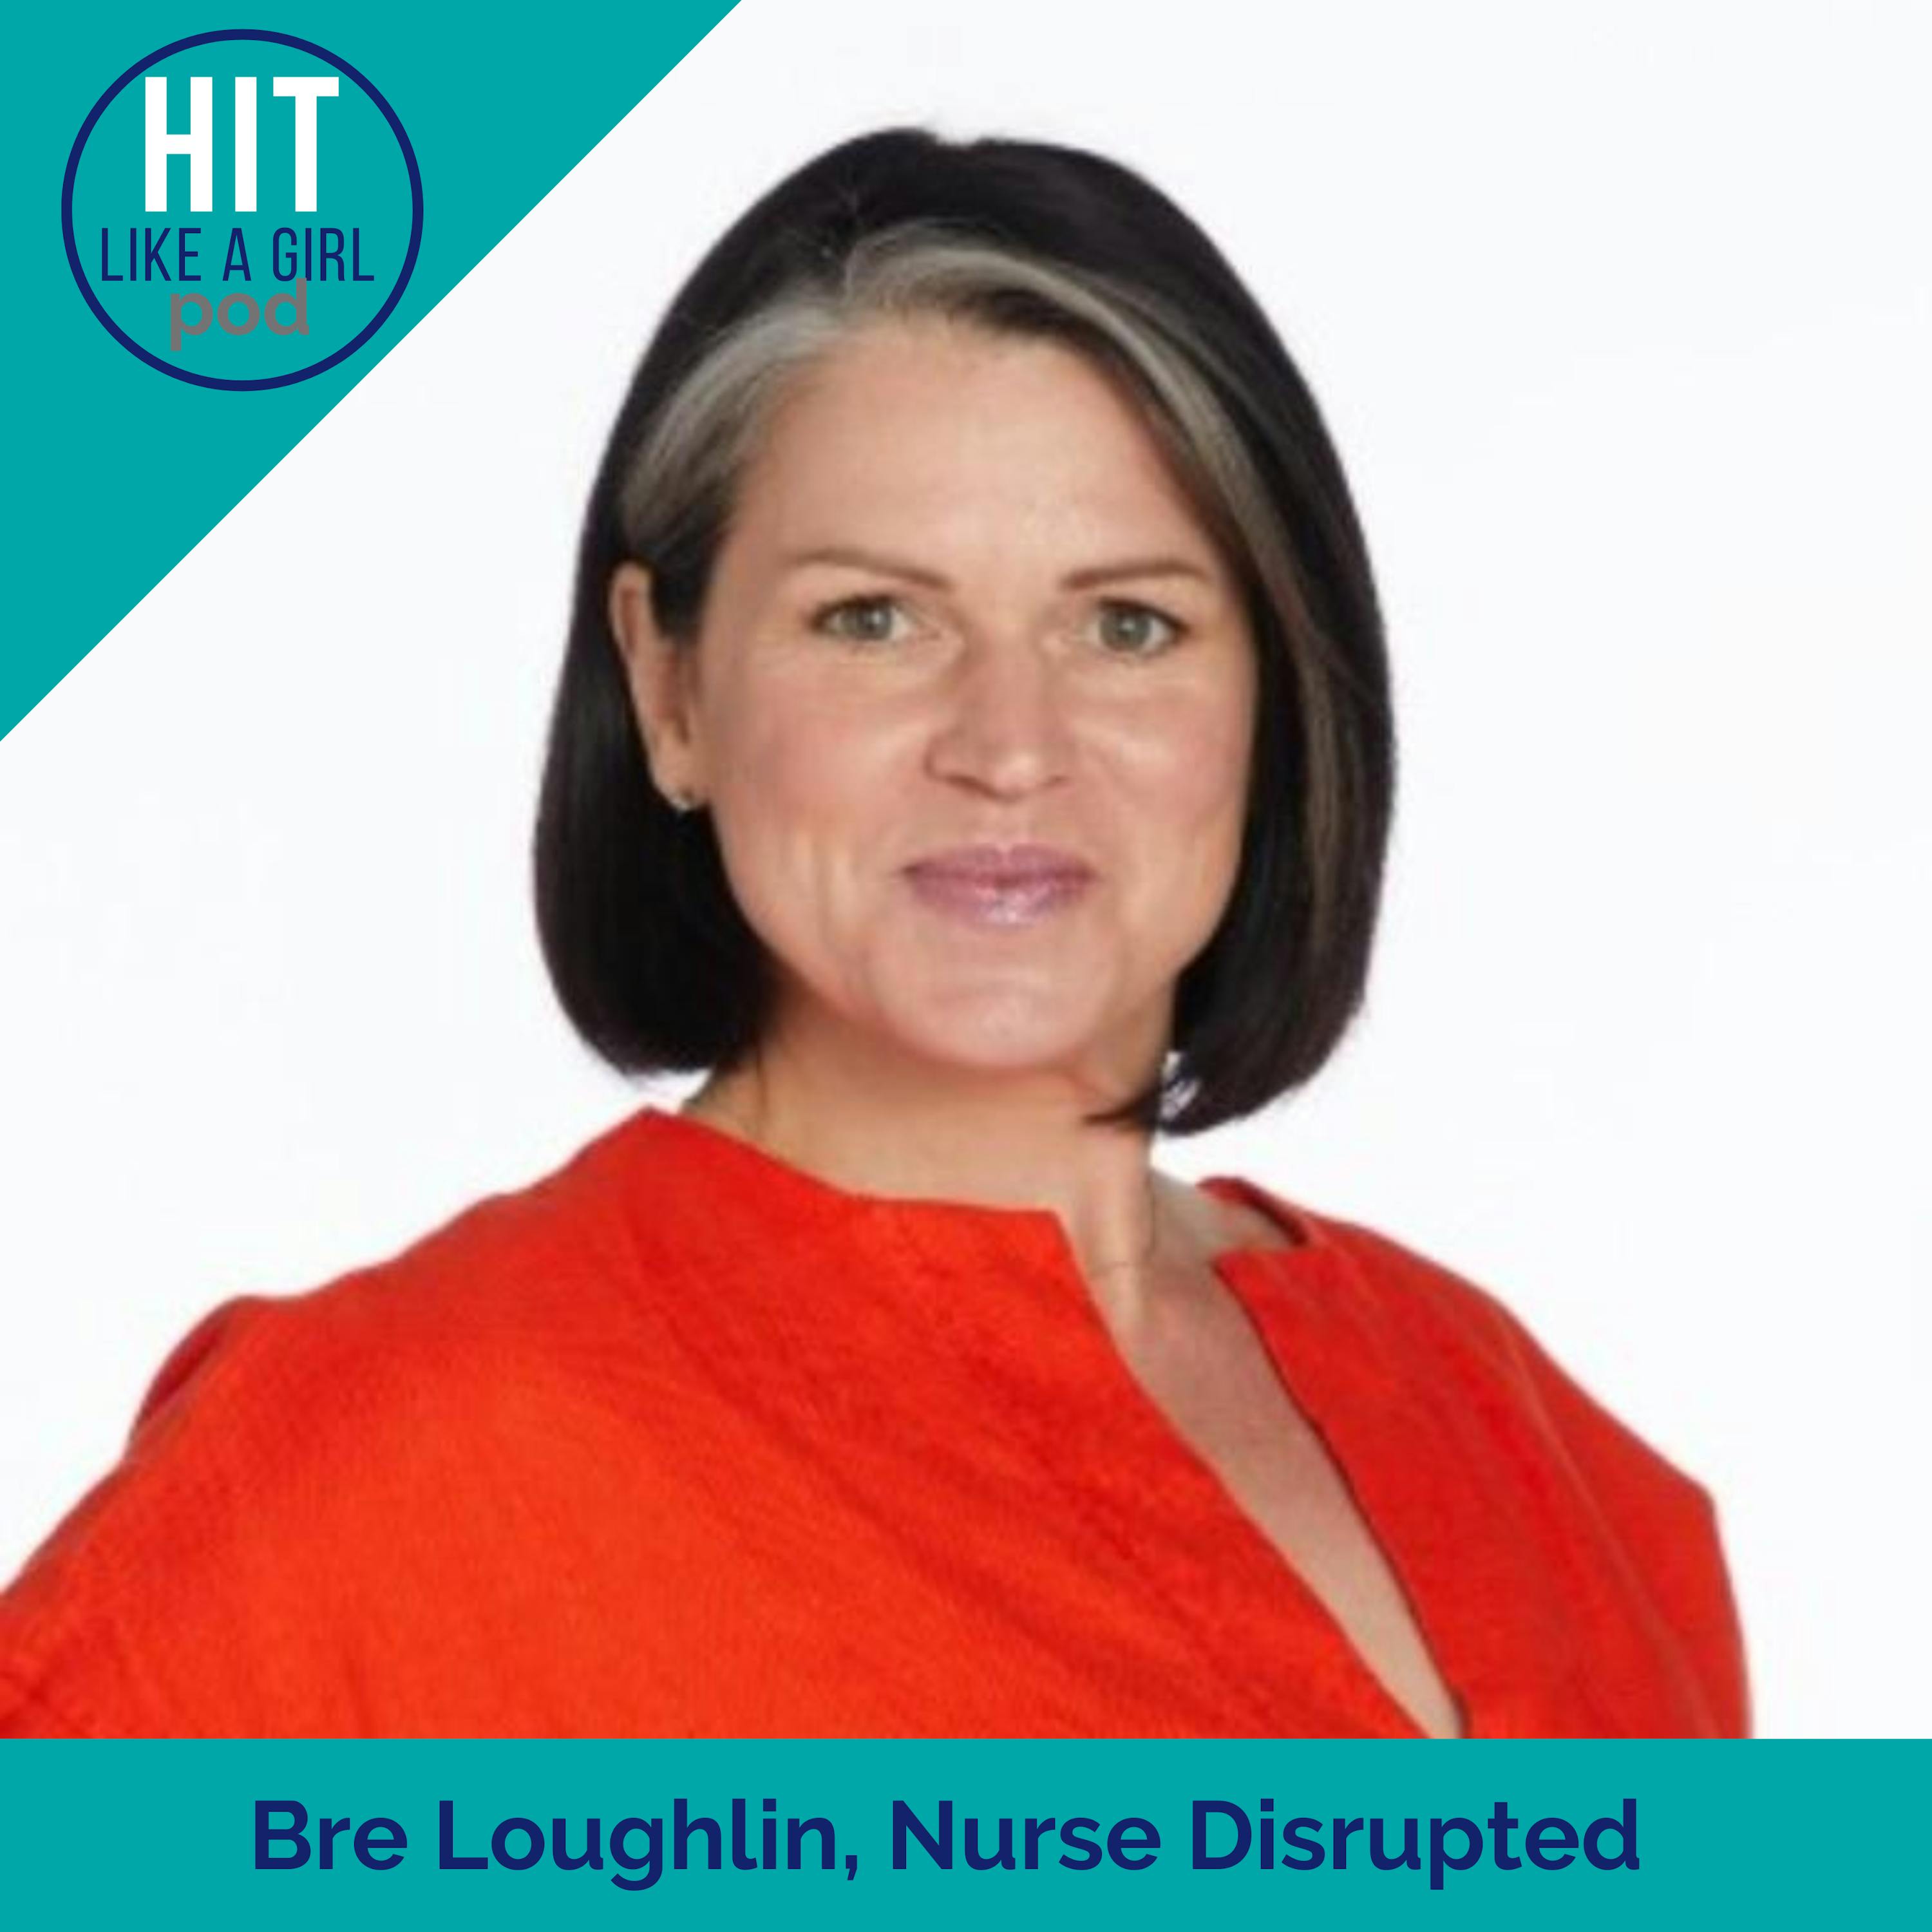 The “Nurse Disruptor”: Making Quality Nursing Services Accessible to All